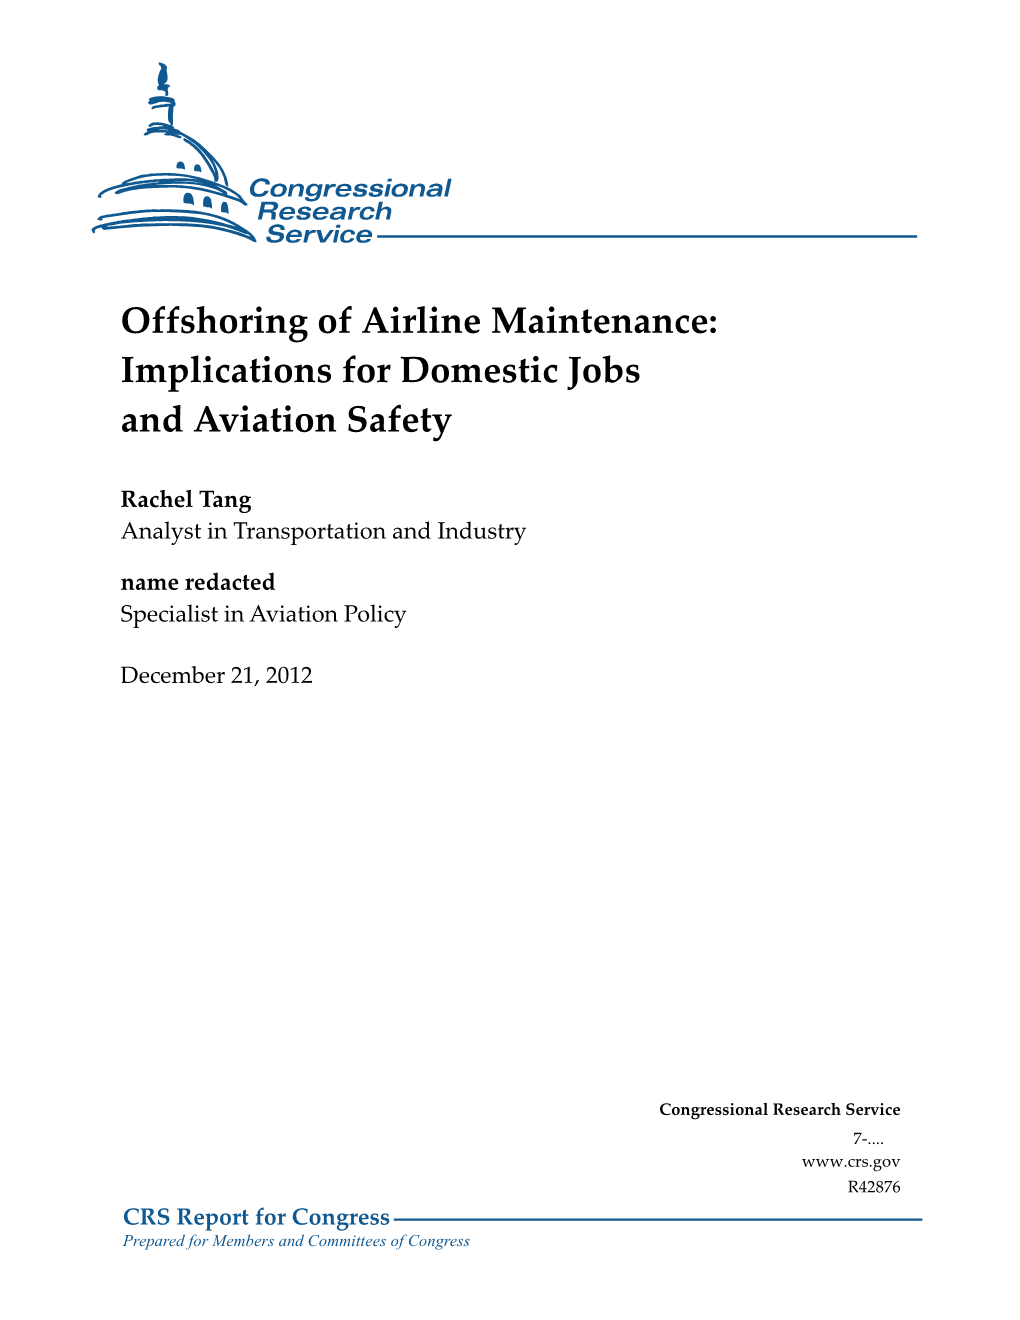 Offshoring of Airline Maintenance: Implications for Domestic Jobs and Aviation Safety